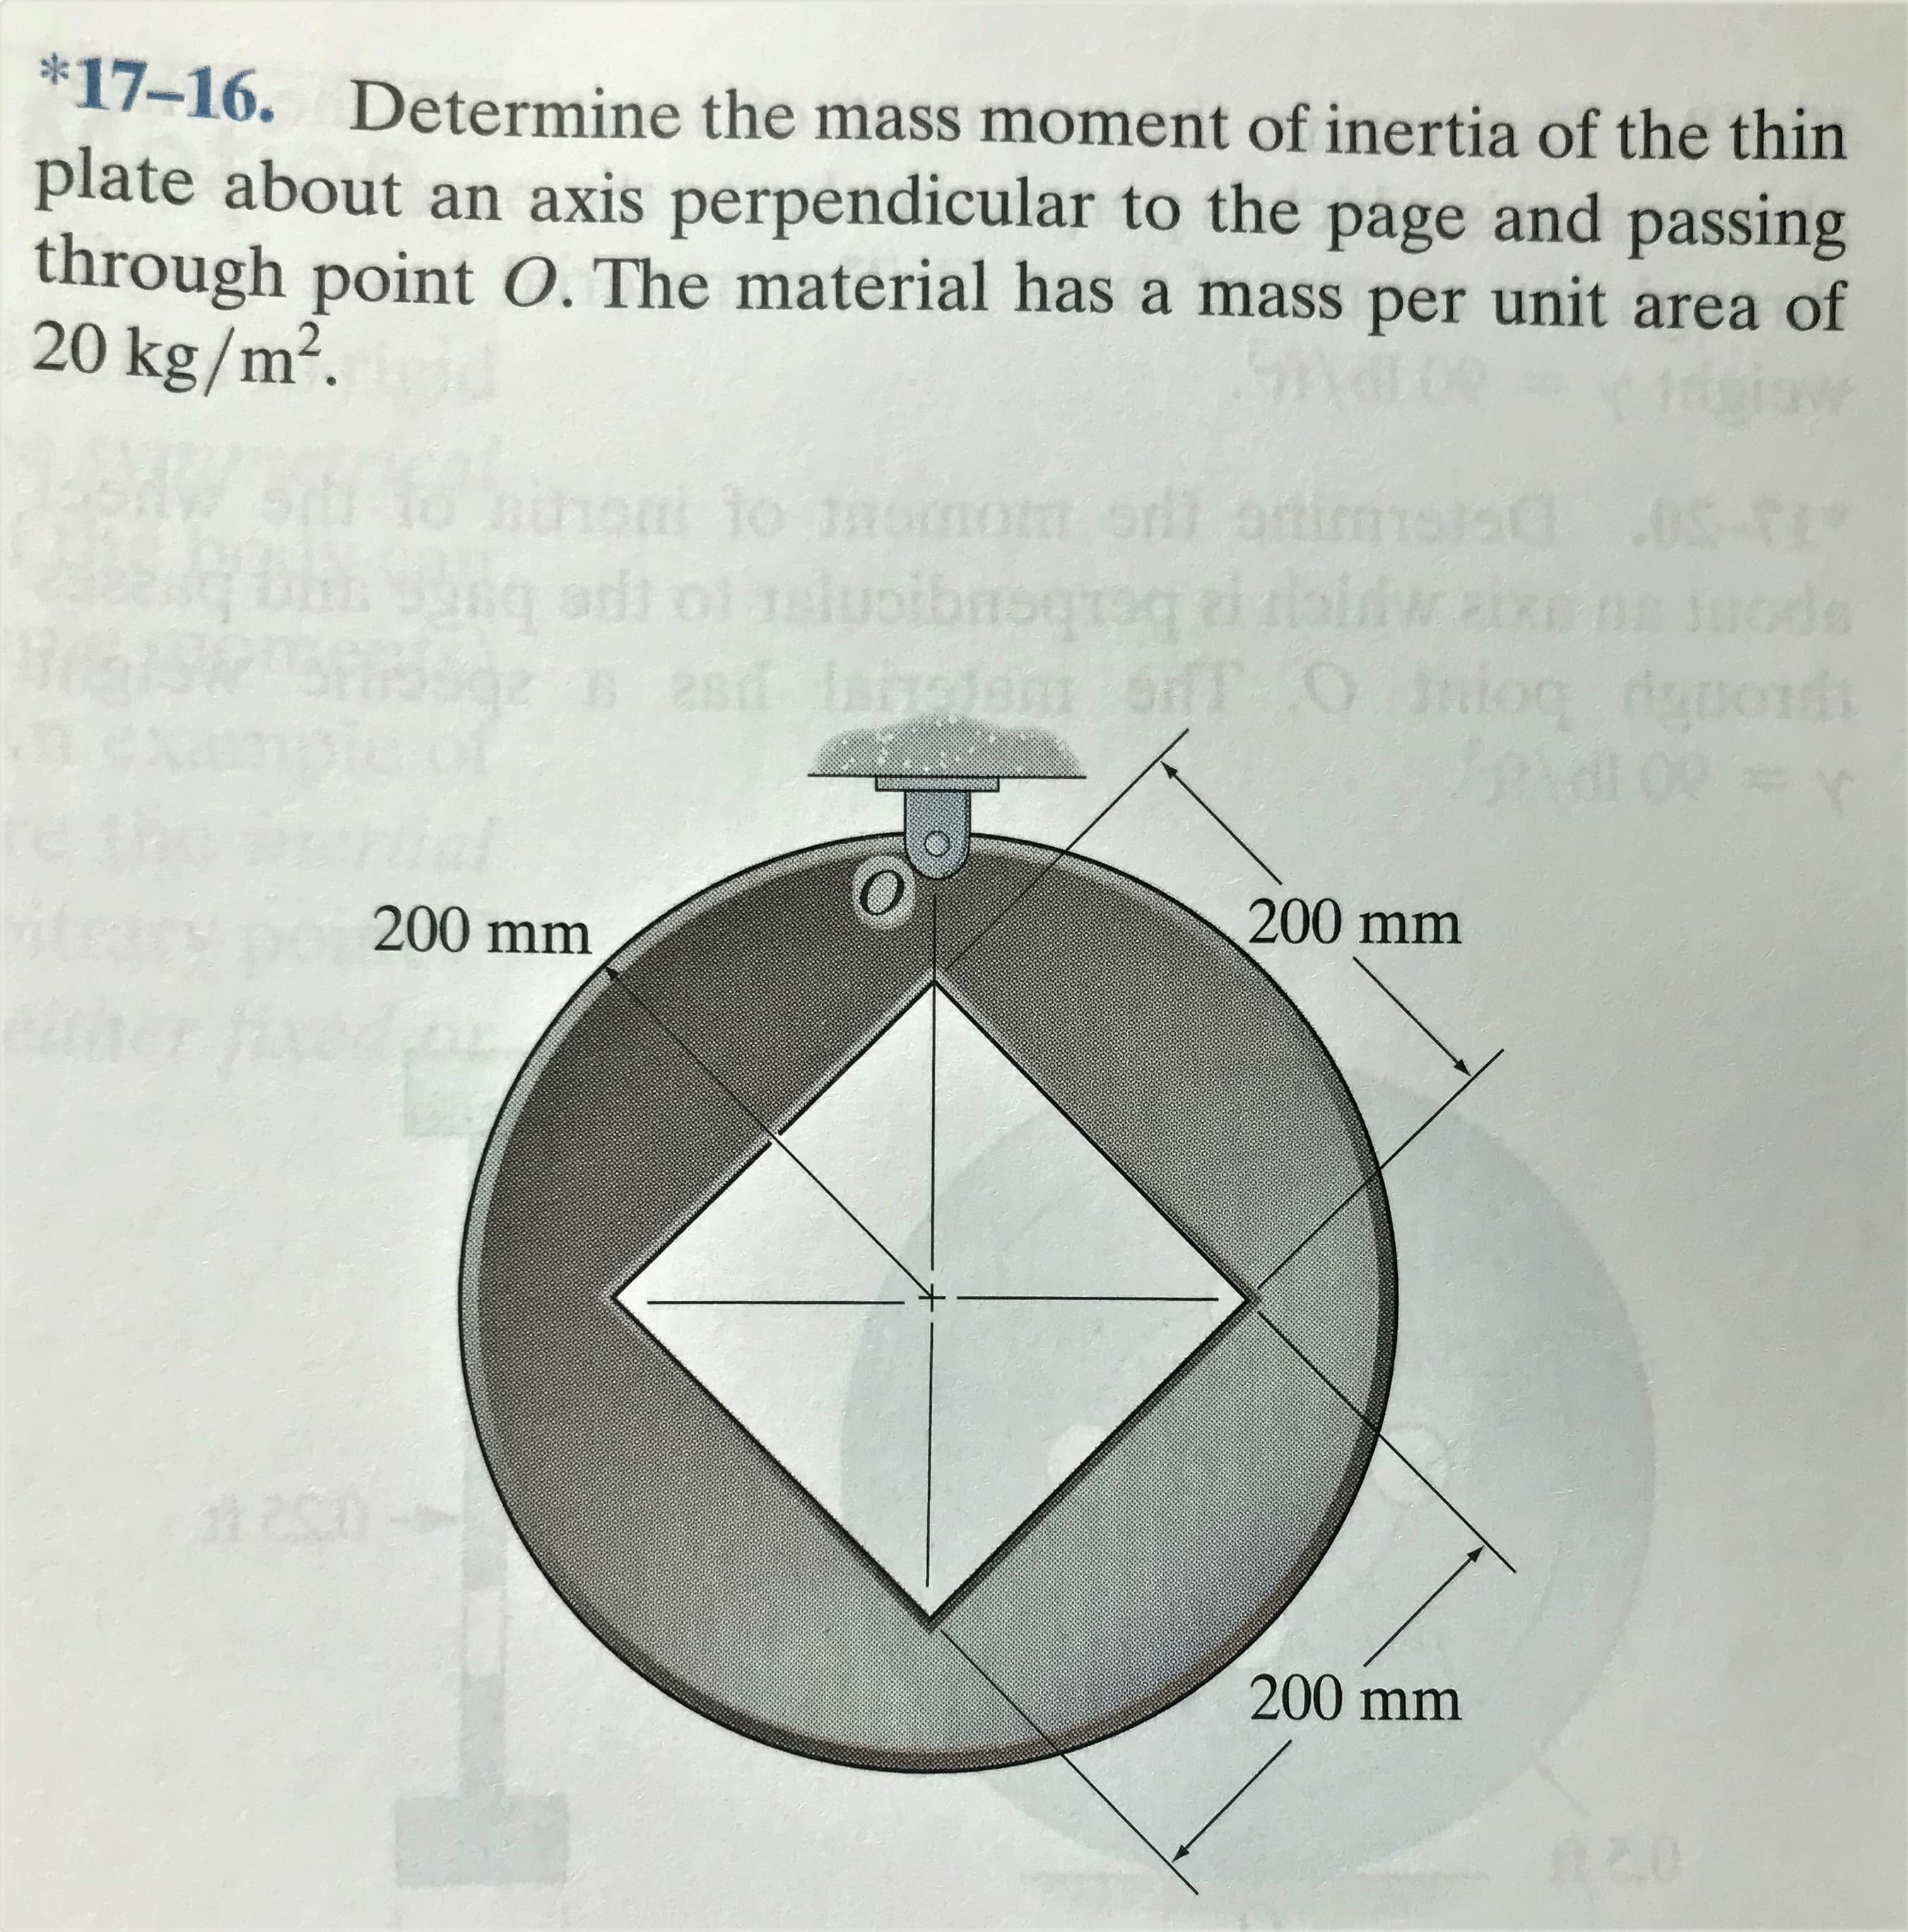 *17-16. Determine the mass moment of inertia of the thin
plate about an axis perpendicular to the page and passing
through point O. The material has a mass per unit area of
20 kg/m².
ow
hthoni to iaomom ori odimets
ng adi ol eluoibnoqrg ei alw ixe na uods
jr benbouqior
వీం
200 mm
200 mm
200 mm
